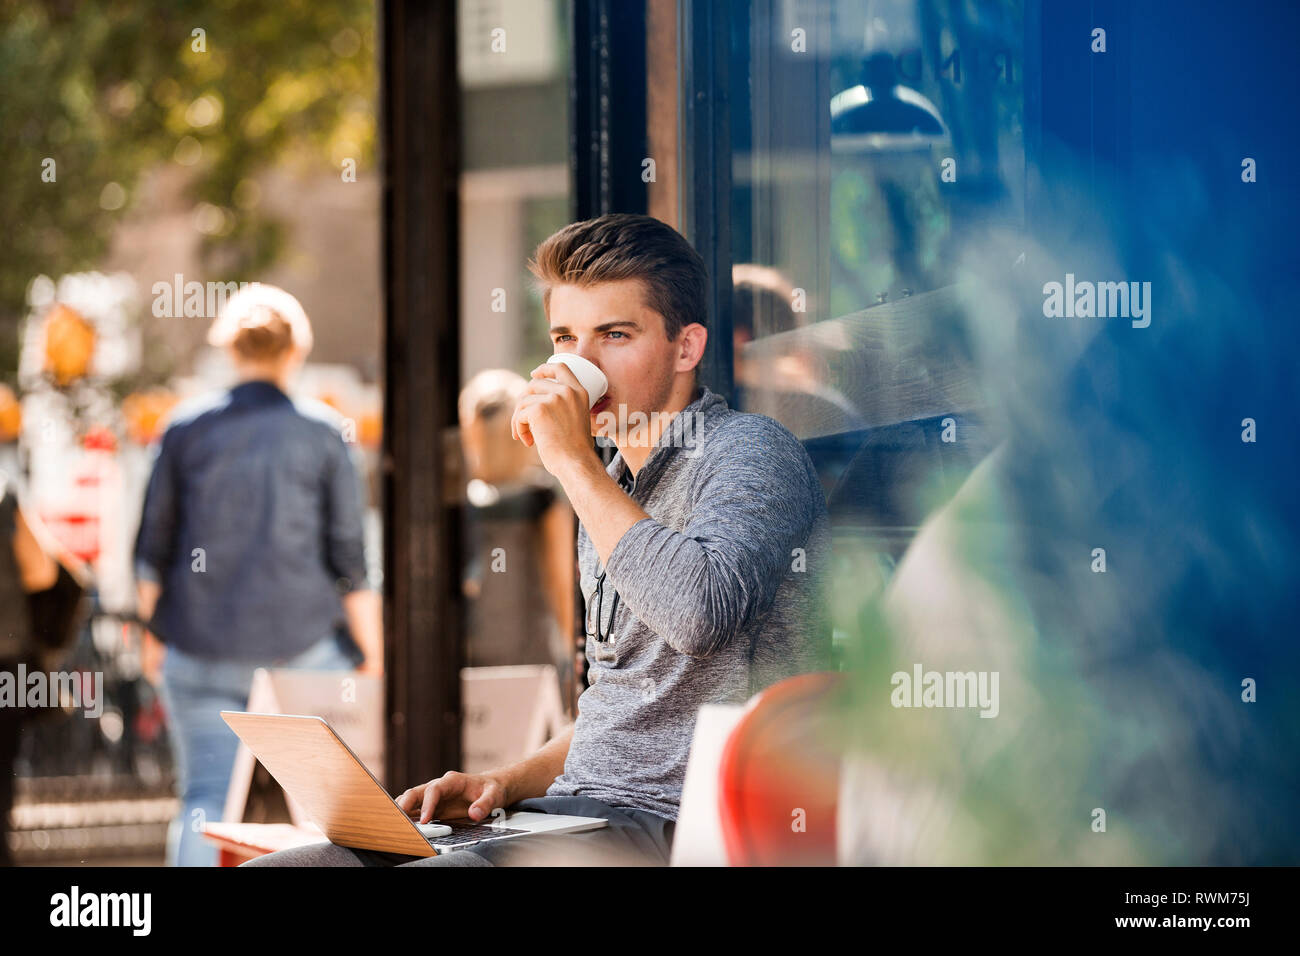 Young man drinking coffee and using laptop at cafe Stock Photo